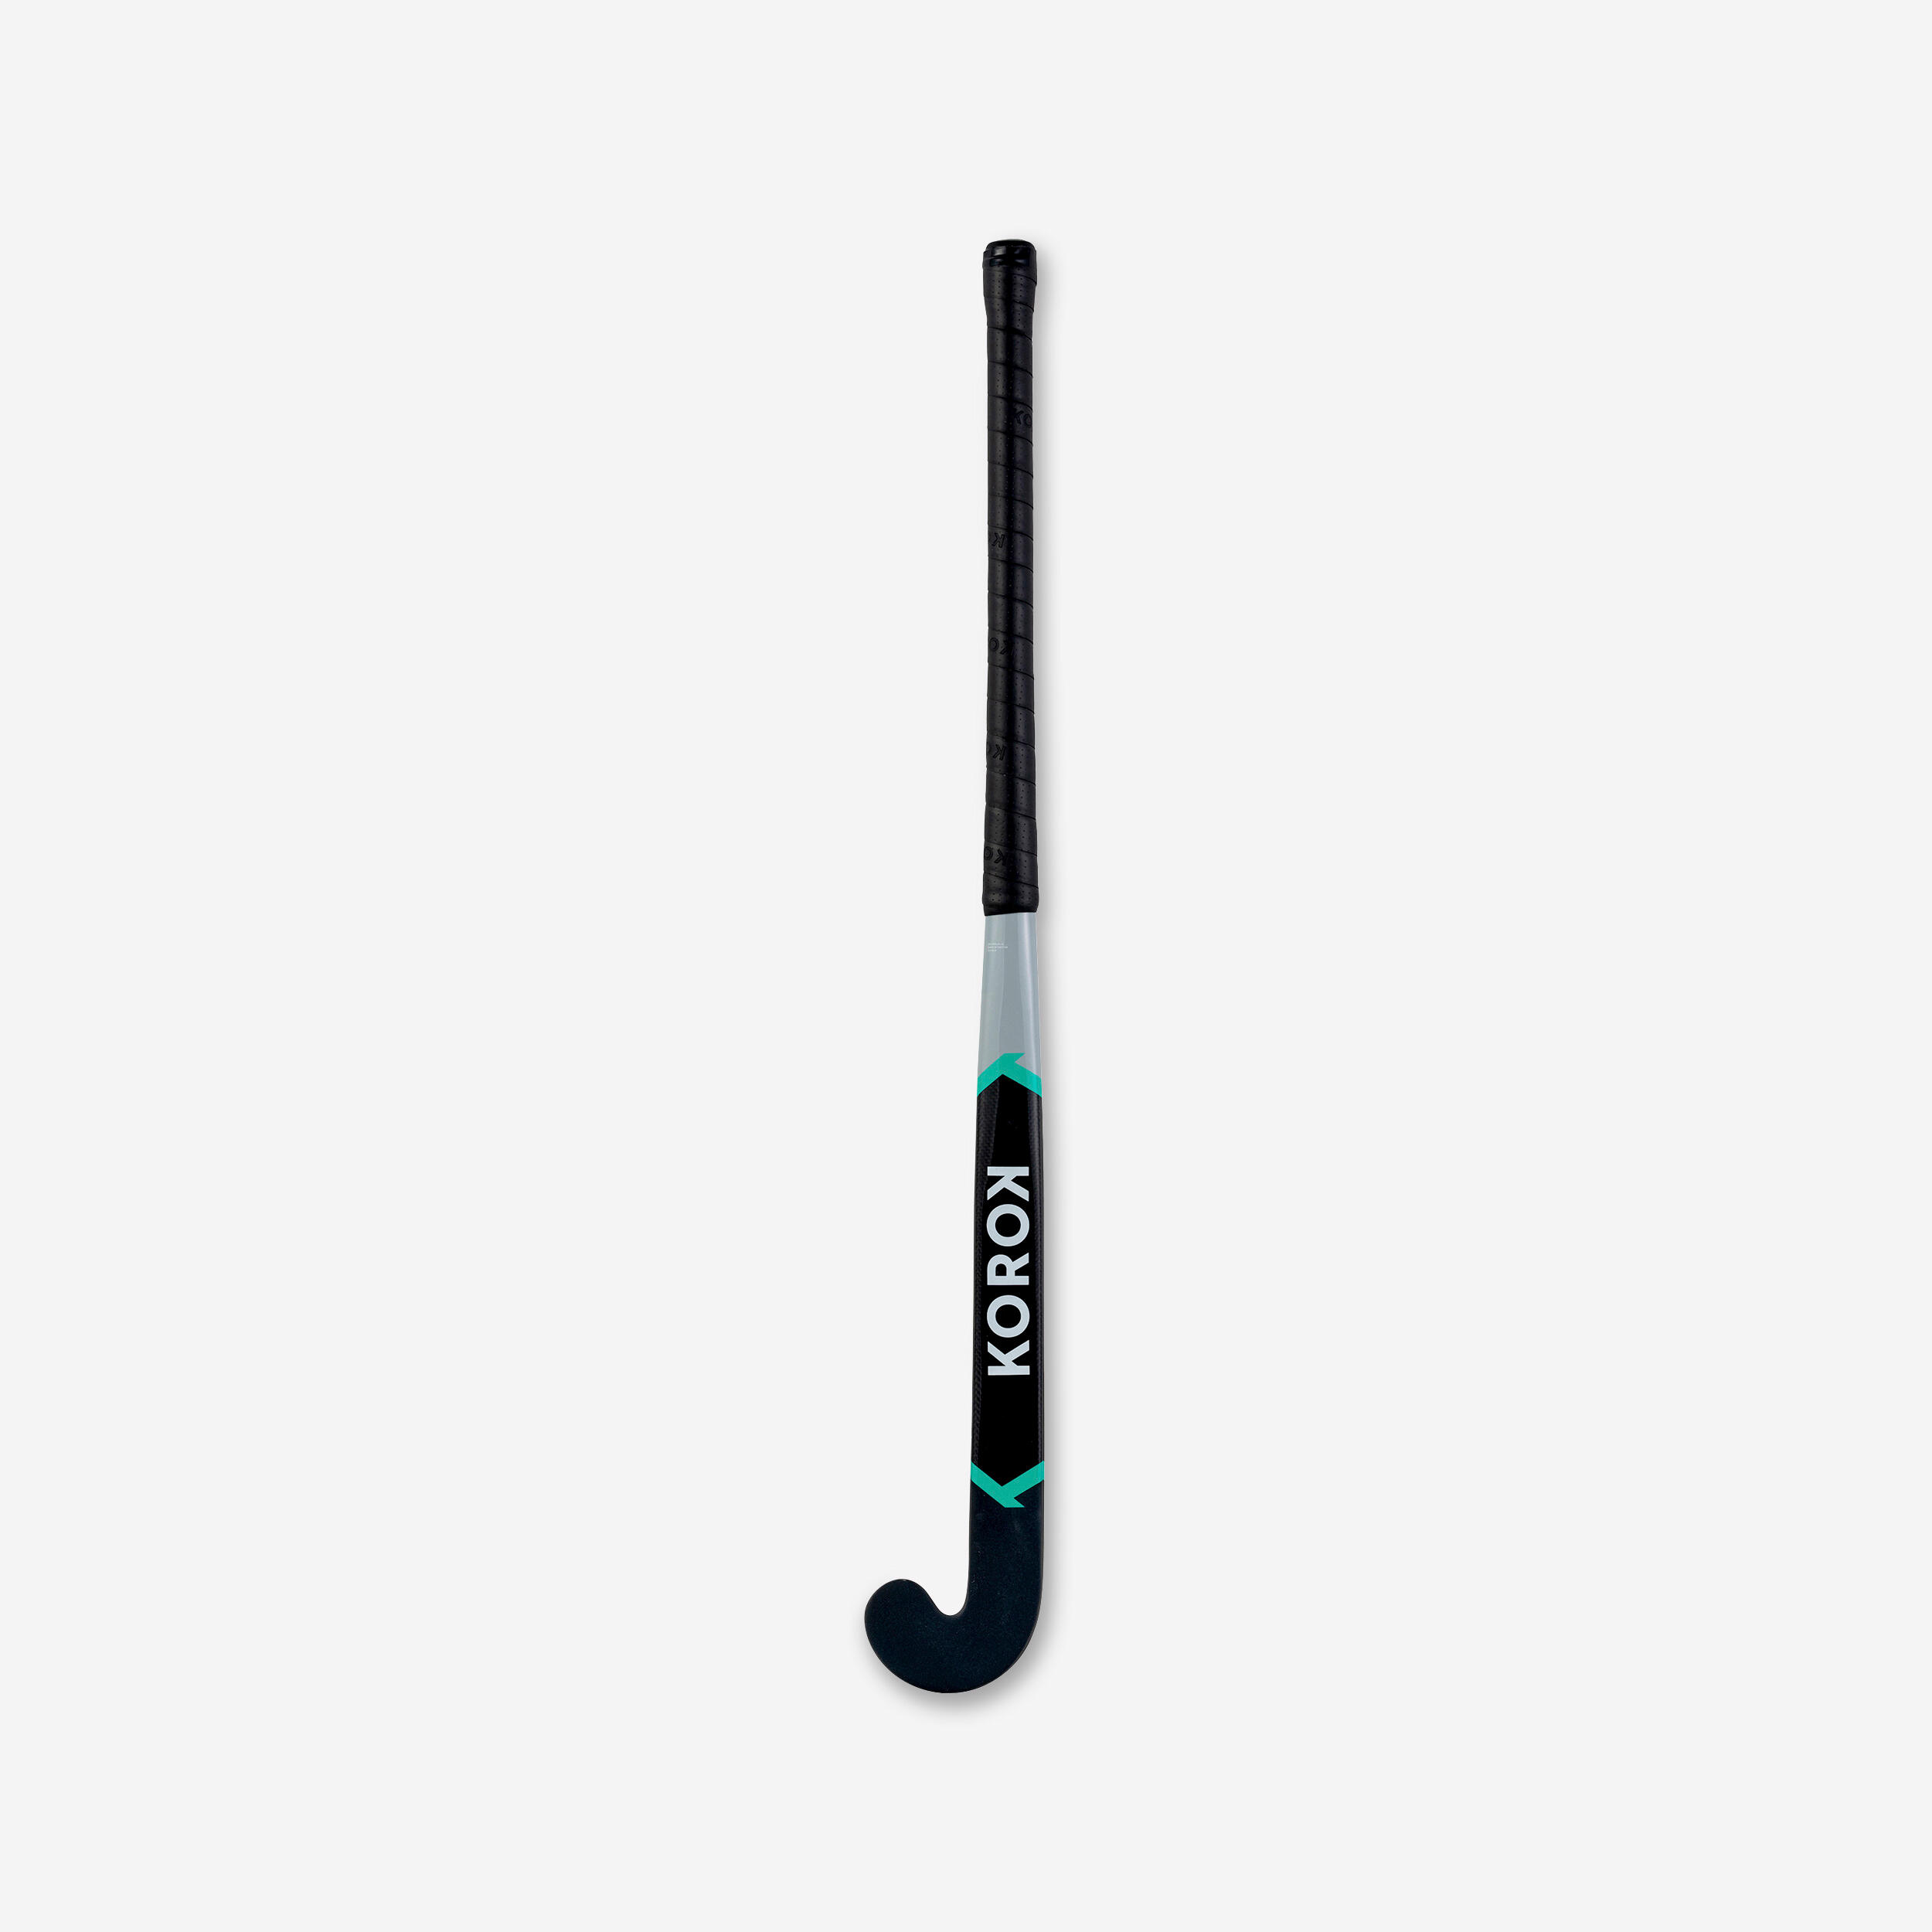 Adult Intermediate 30% Carbon Mid Bow Field Hockey Stick FH530 - Grey/Turquoise 5/12